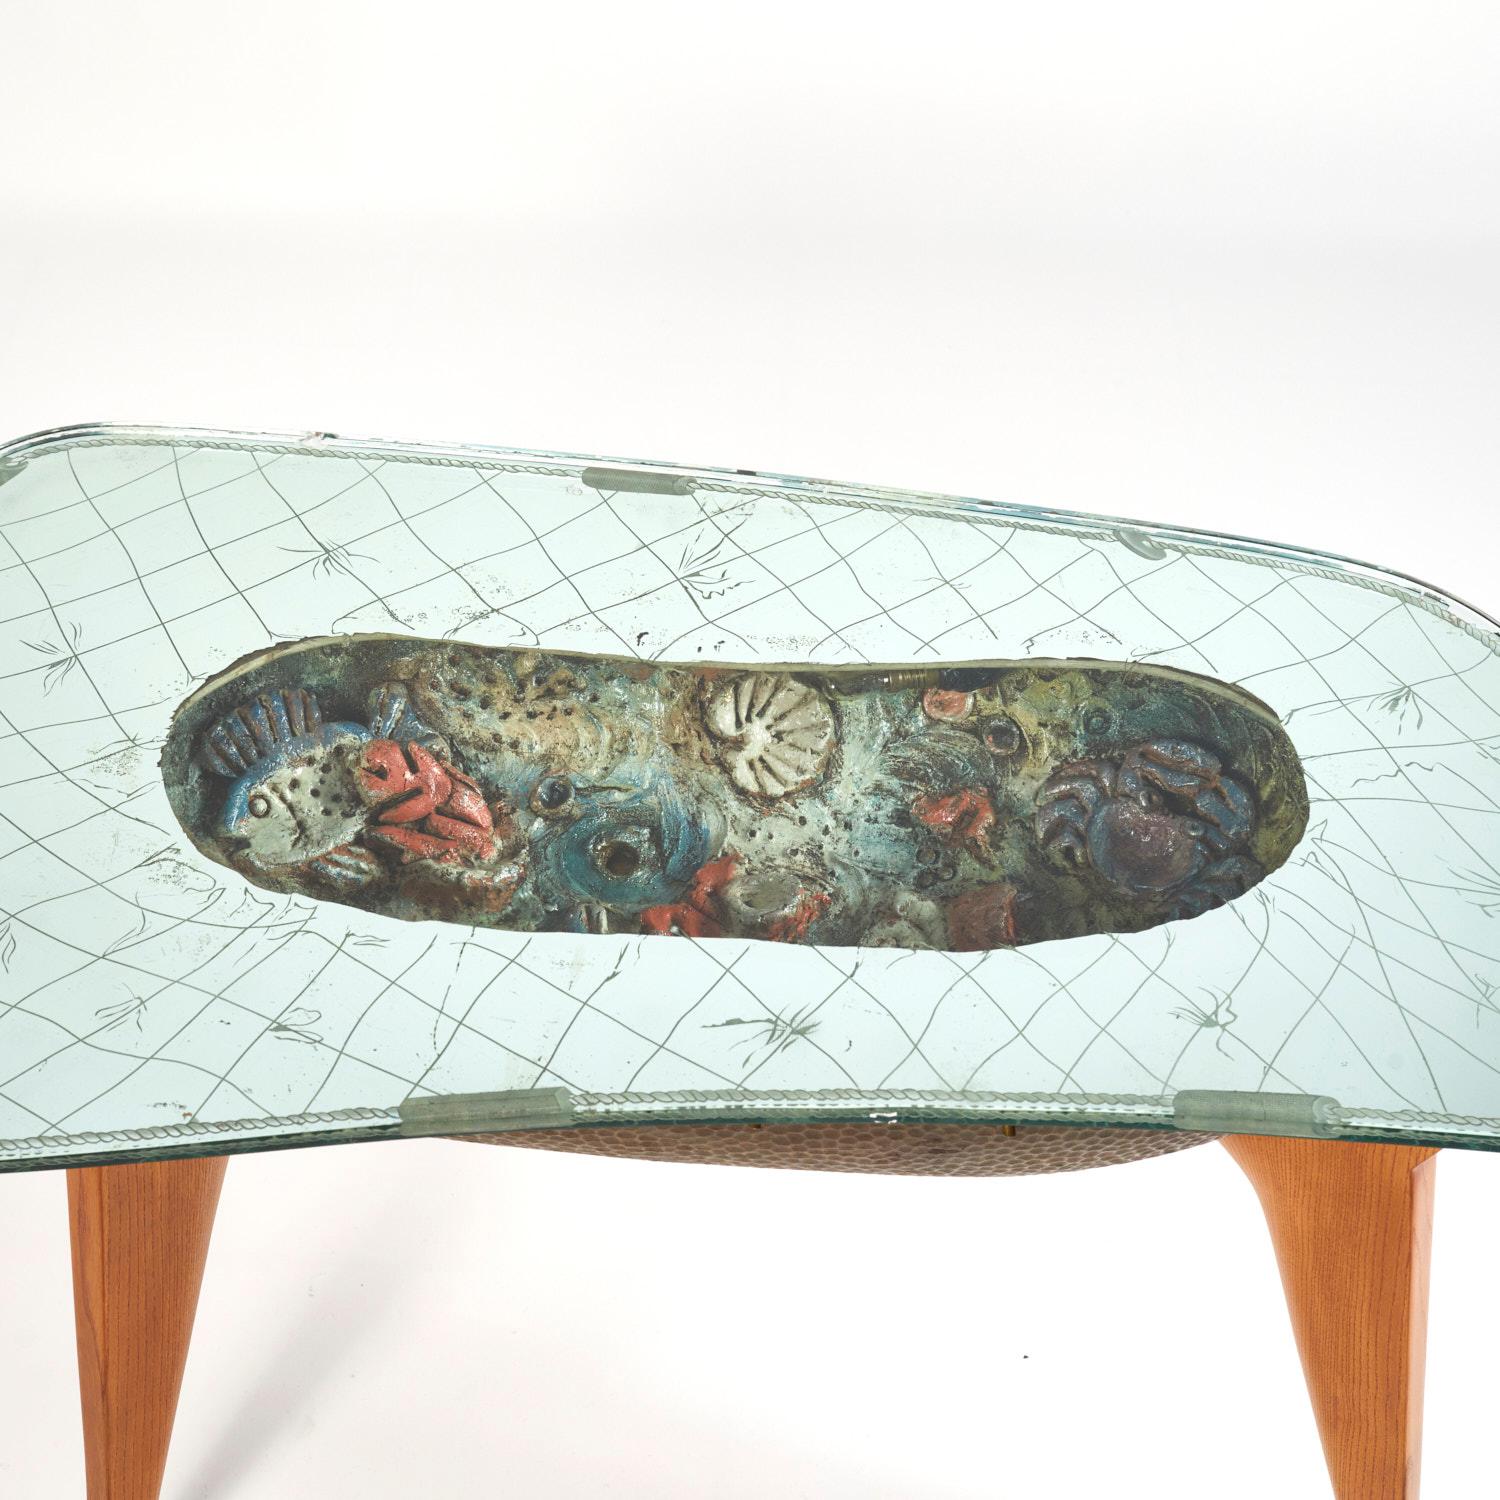 Unusual and decorative low table that imitates an aquarium. Made from a carved and hammered wood shell which contains a ceramic seabed, lightning system and it is covered by a partially mirrored glass. The structure is made from oakwood and it